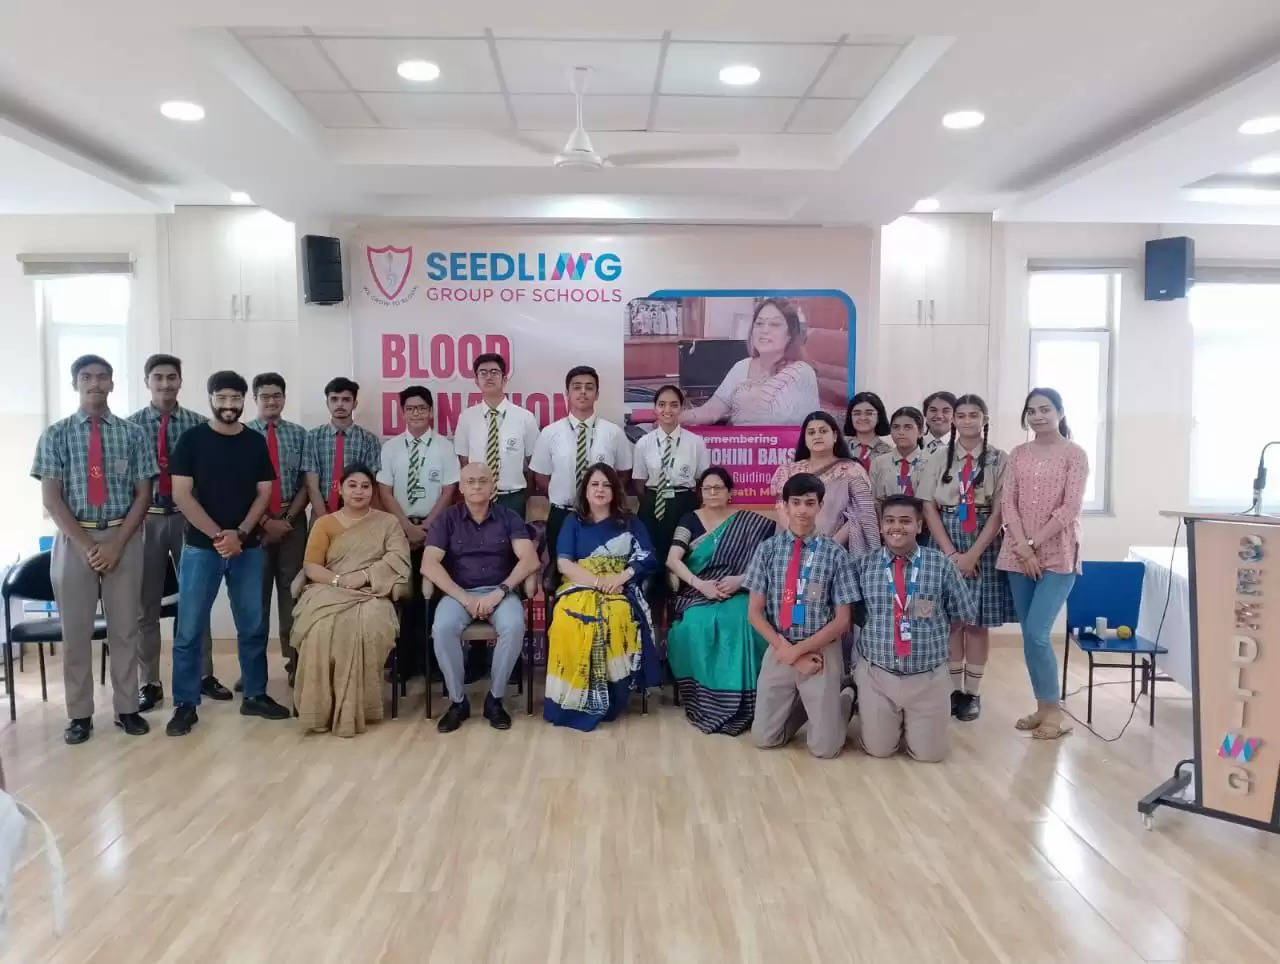 Seedling School Udaipur Organised a Blood Donation Camp in honor of Founder Director Ms Mohini Bakshi on her second death anniversary